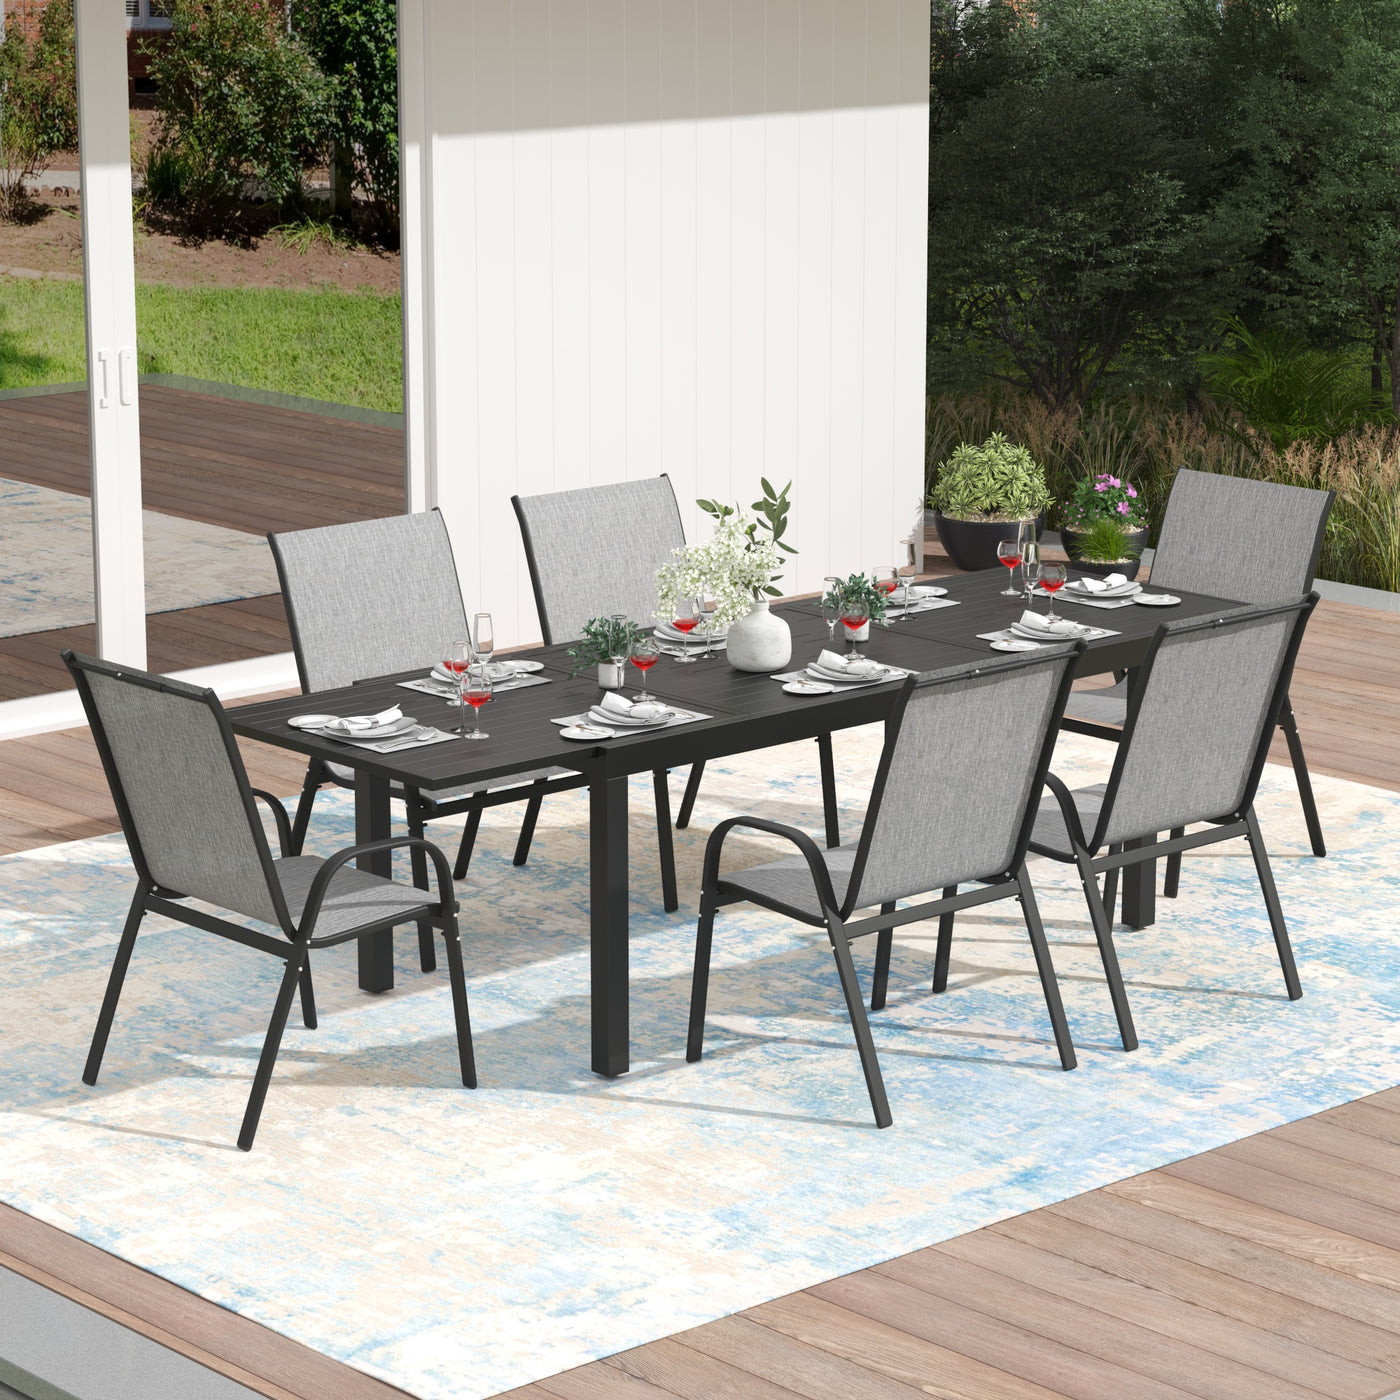 Outdoor dining set with a Pizzello Aluminum Patio Extendable Dining Table and six chairs on a patio.